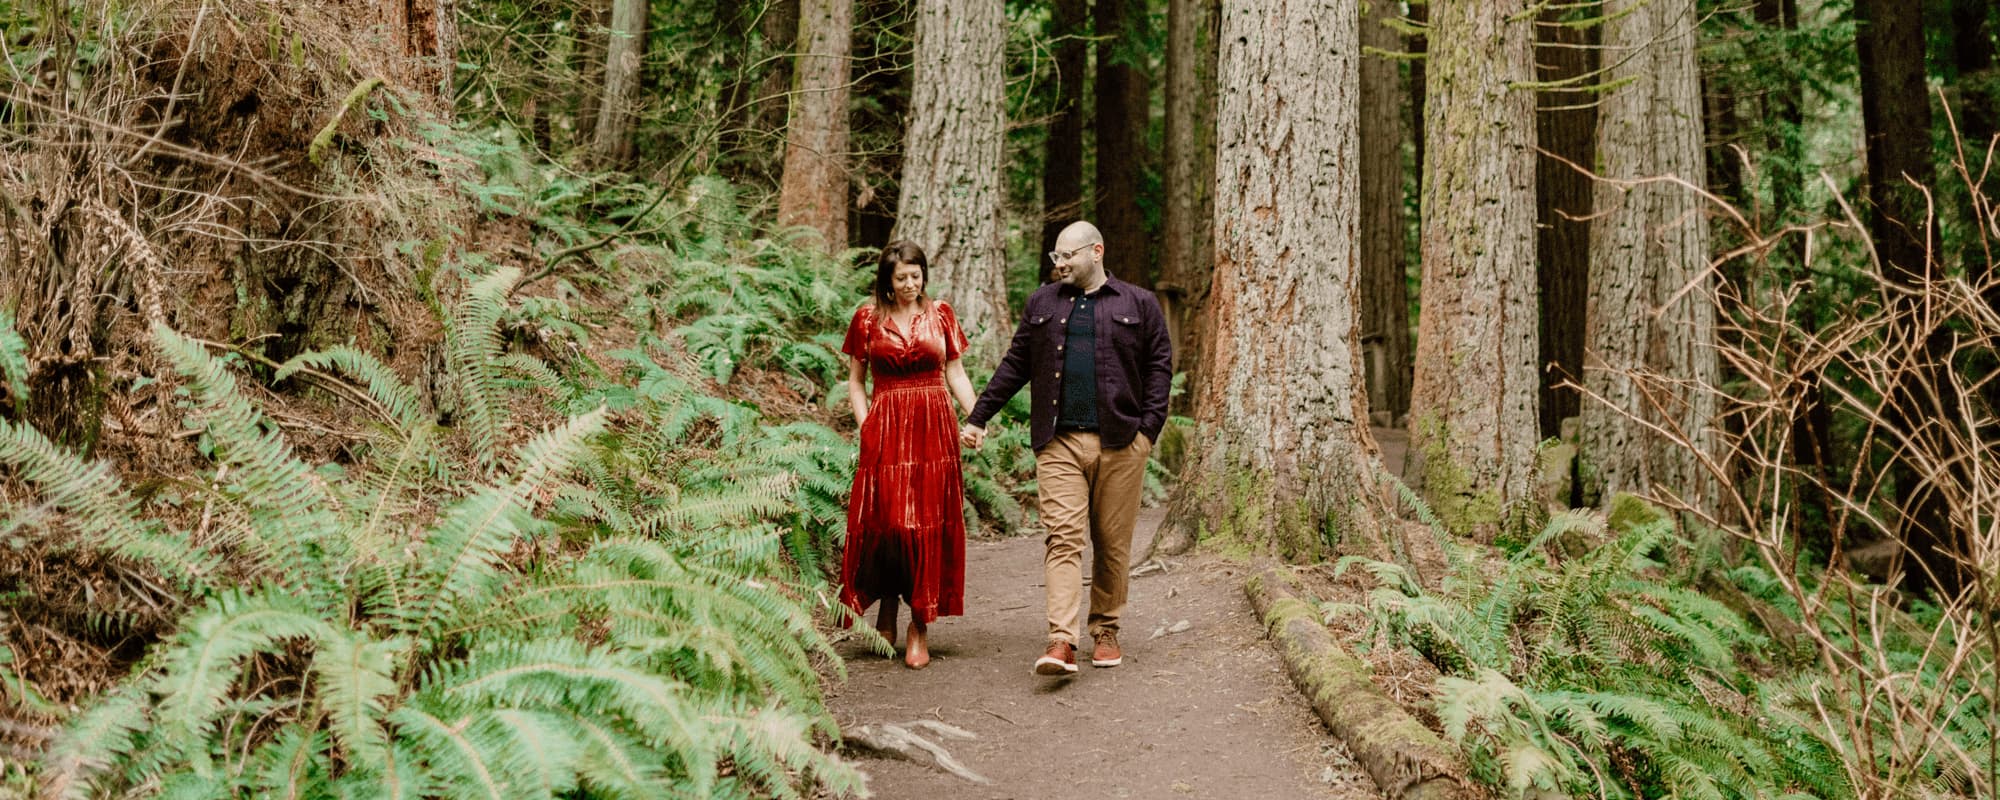 Andrew and Kate are walking in the forest. They are our latest #MiaDonnaHeroes featured couple.